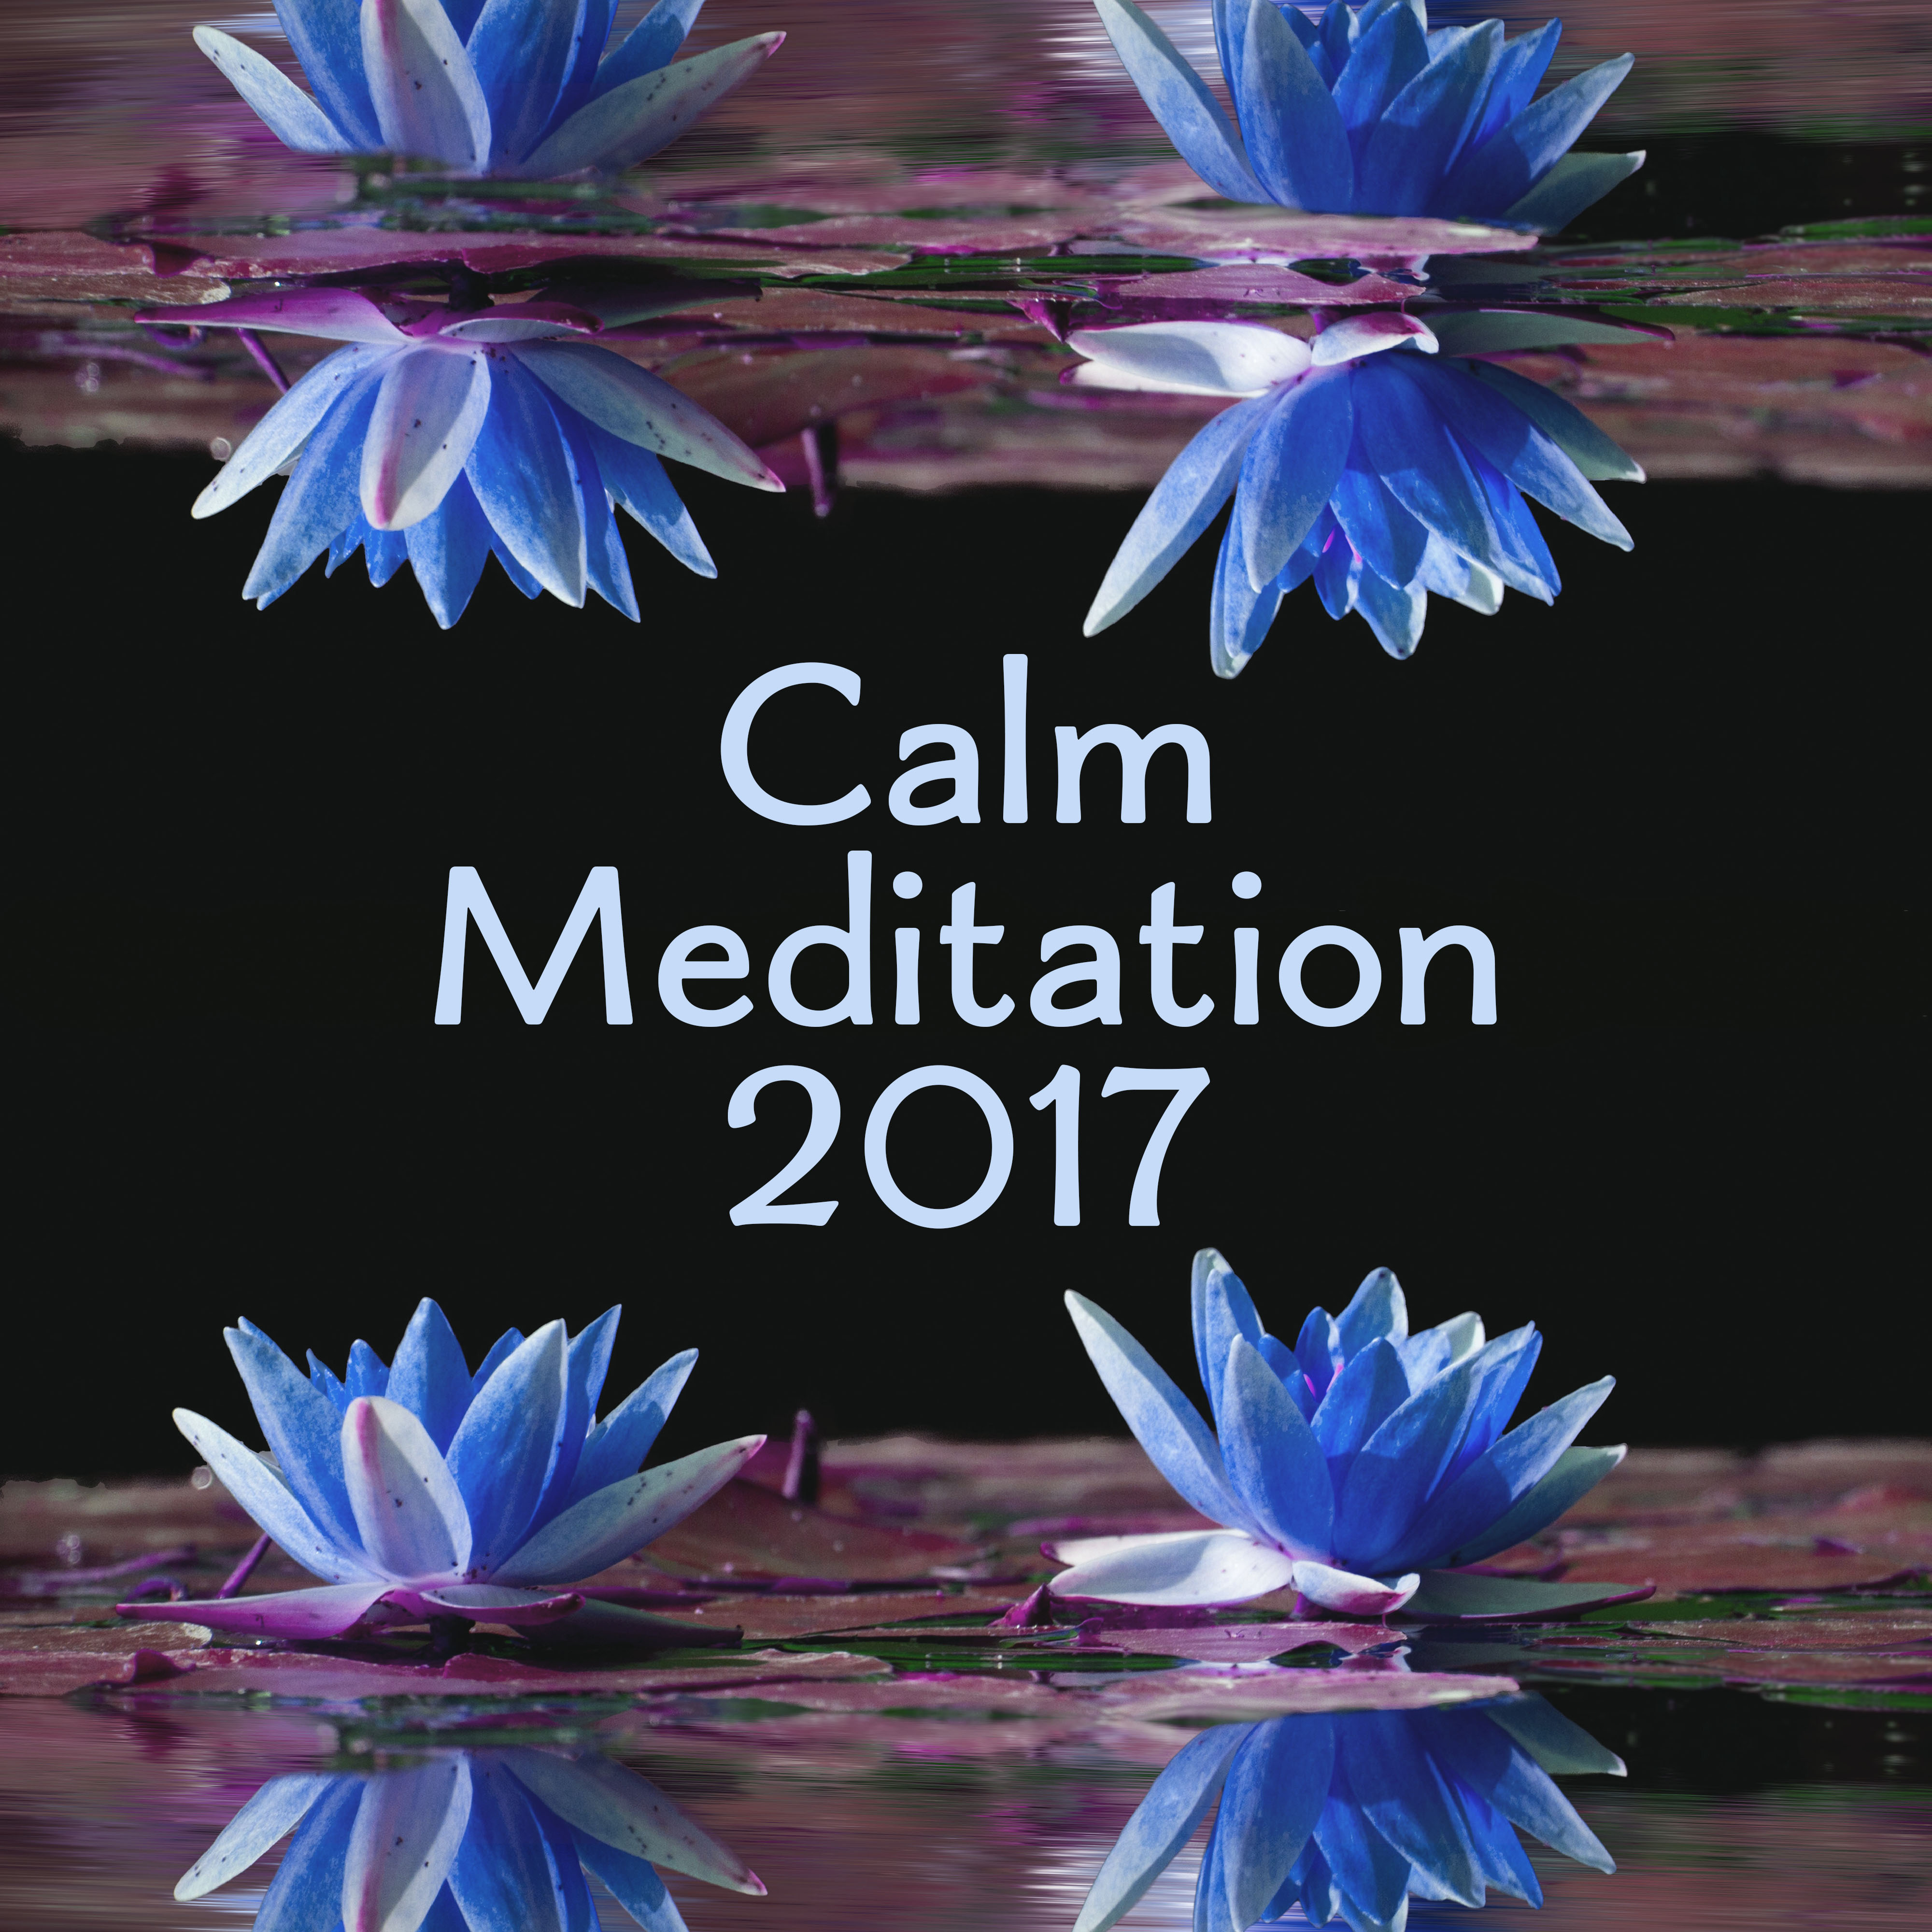 Calm Meditation 2017 – Chakra Balancing, Stress Relief Music, Zen, Sounds of Yoga, Pure Relaxation, Clear Mind, Deep Concentration, Meditate